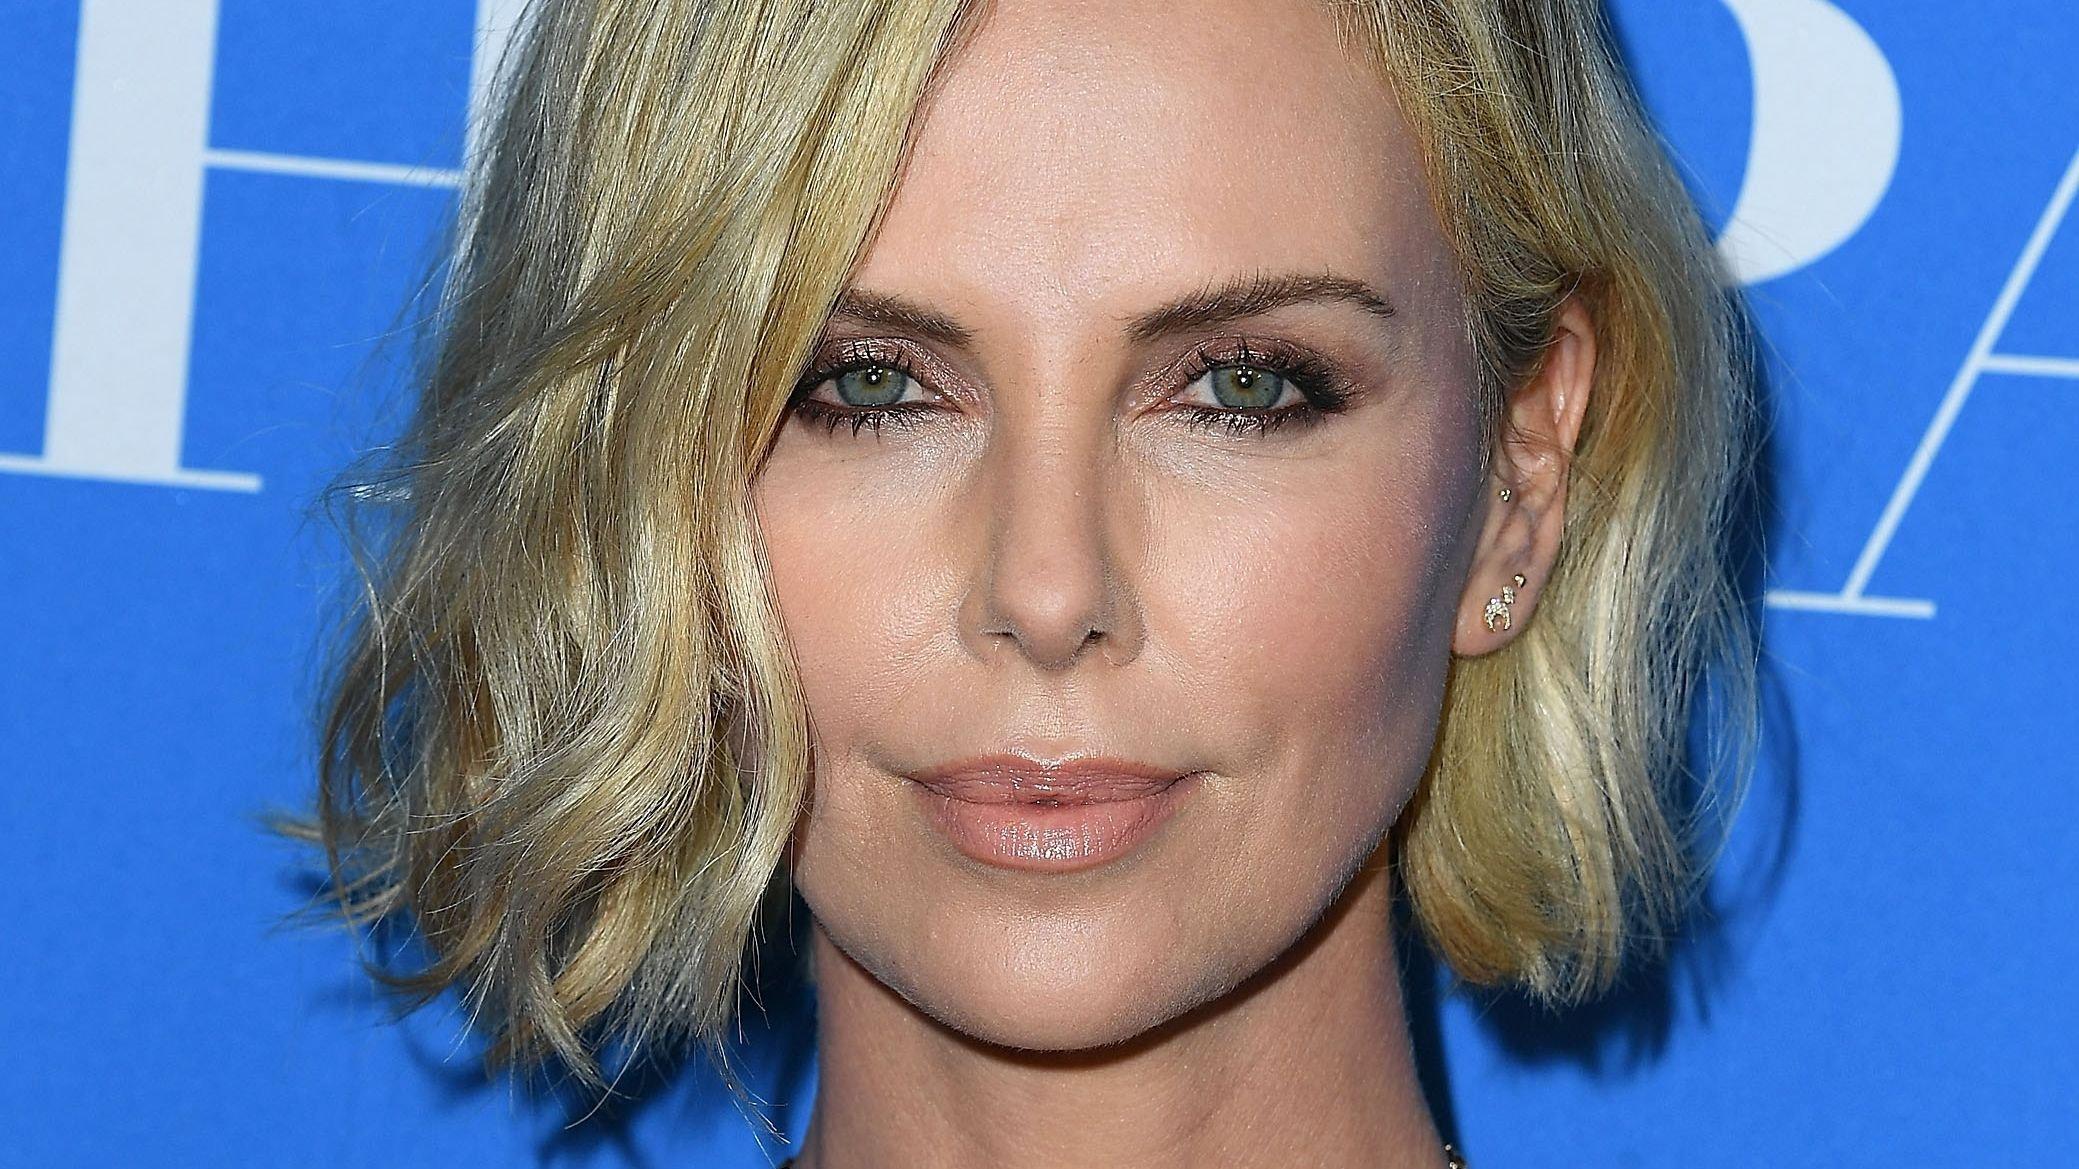 Charlize Theron with short blonde hair and smokey eye makeup.